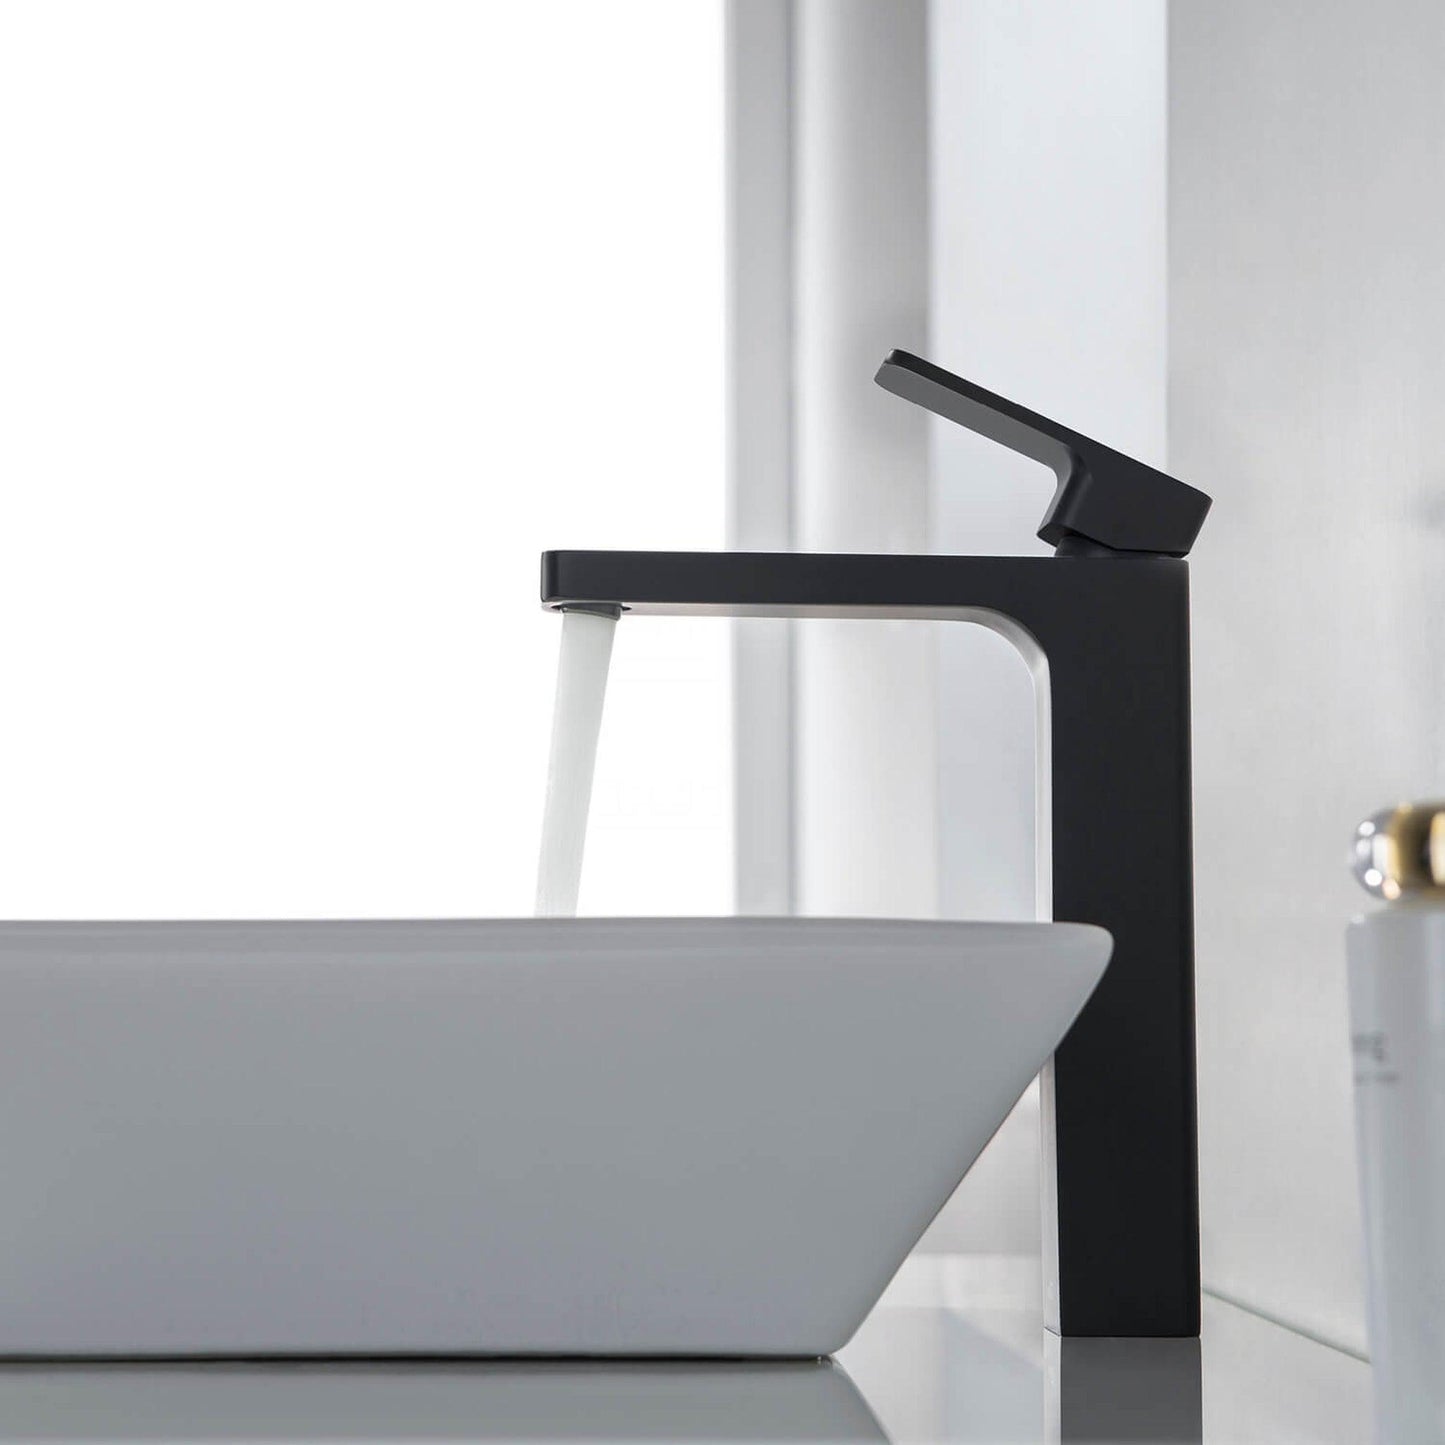 KIBI Blaze-T Single Handle Matte Black Solid Brass Bathroom Vessel Sink Faucet With Pop-Up Drain Stopper Small Cover Without Overflow